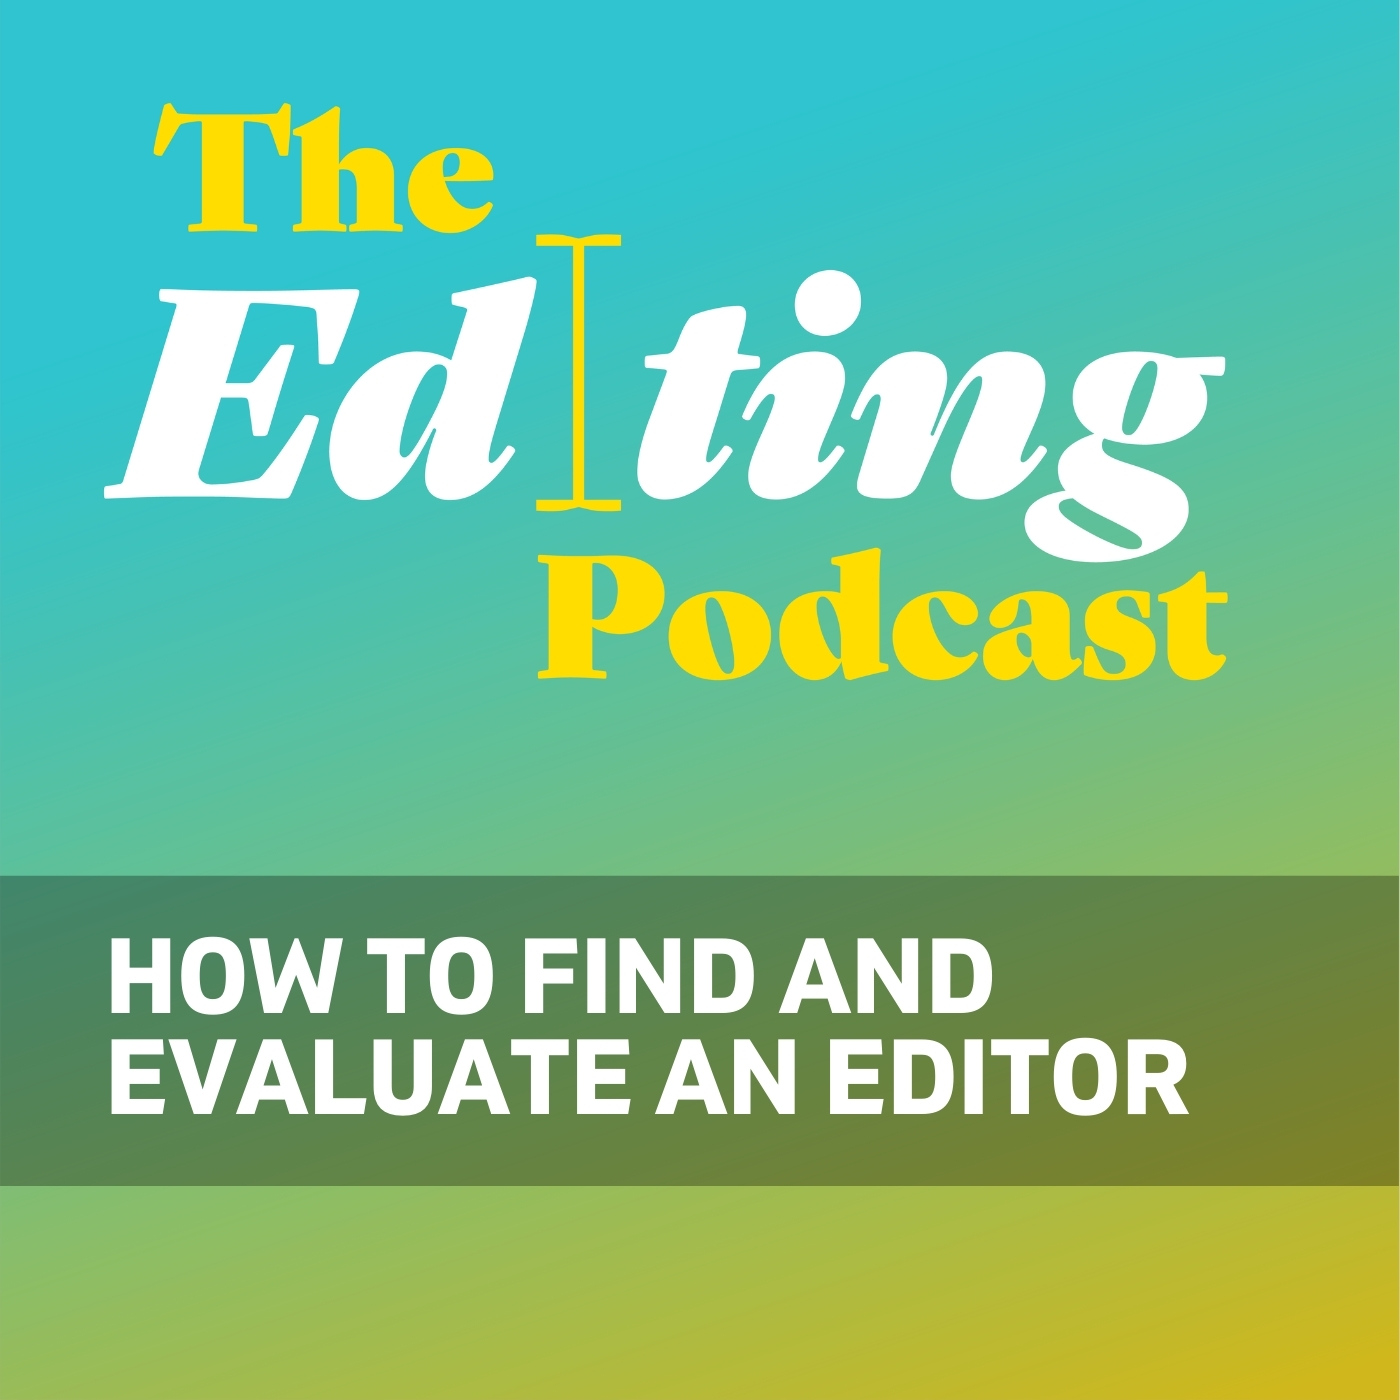 Artwork for podcast The Editing Podcast